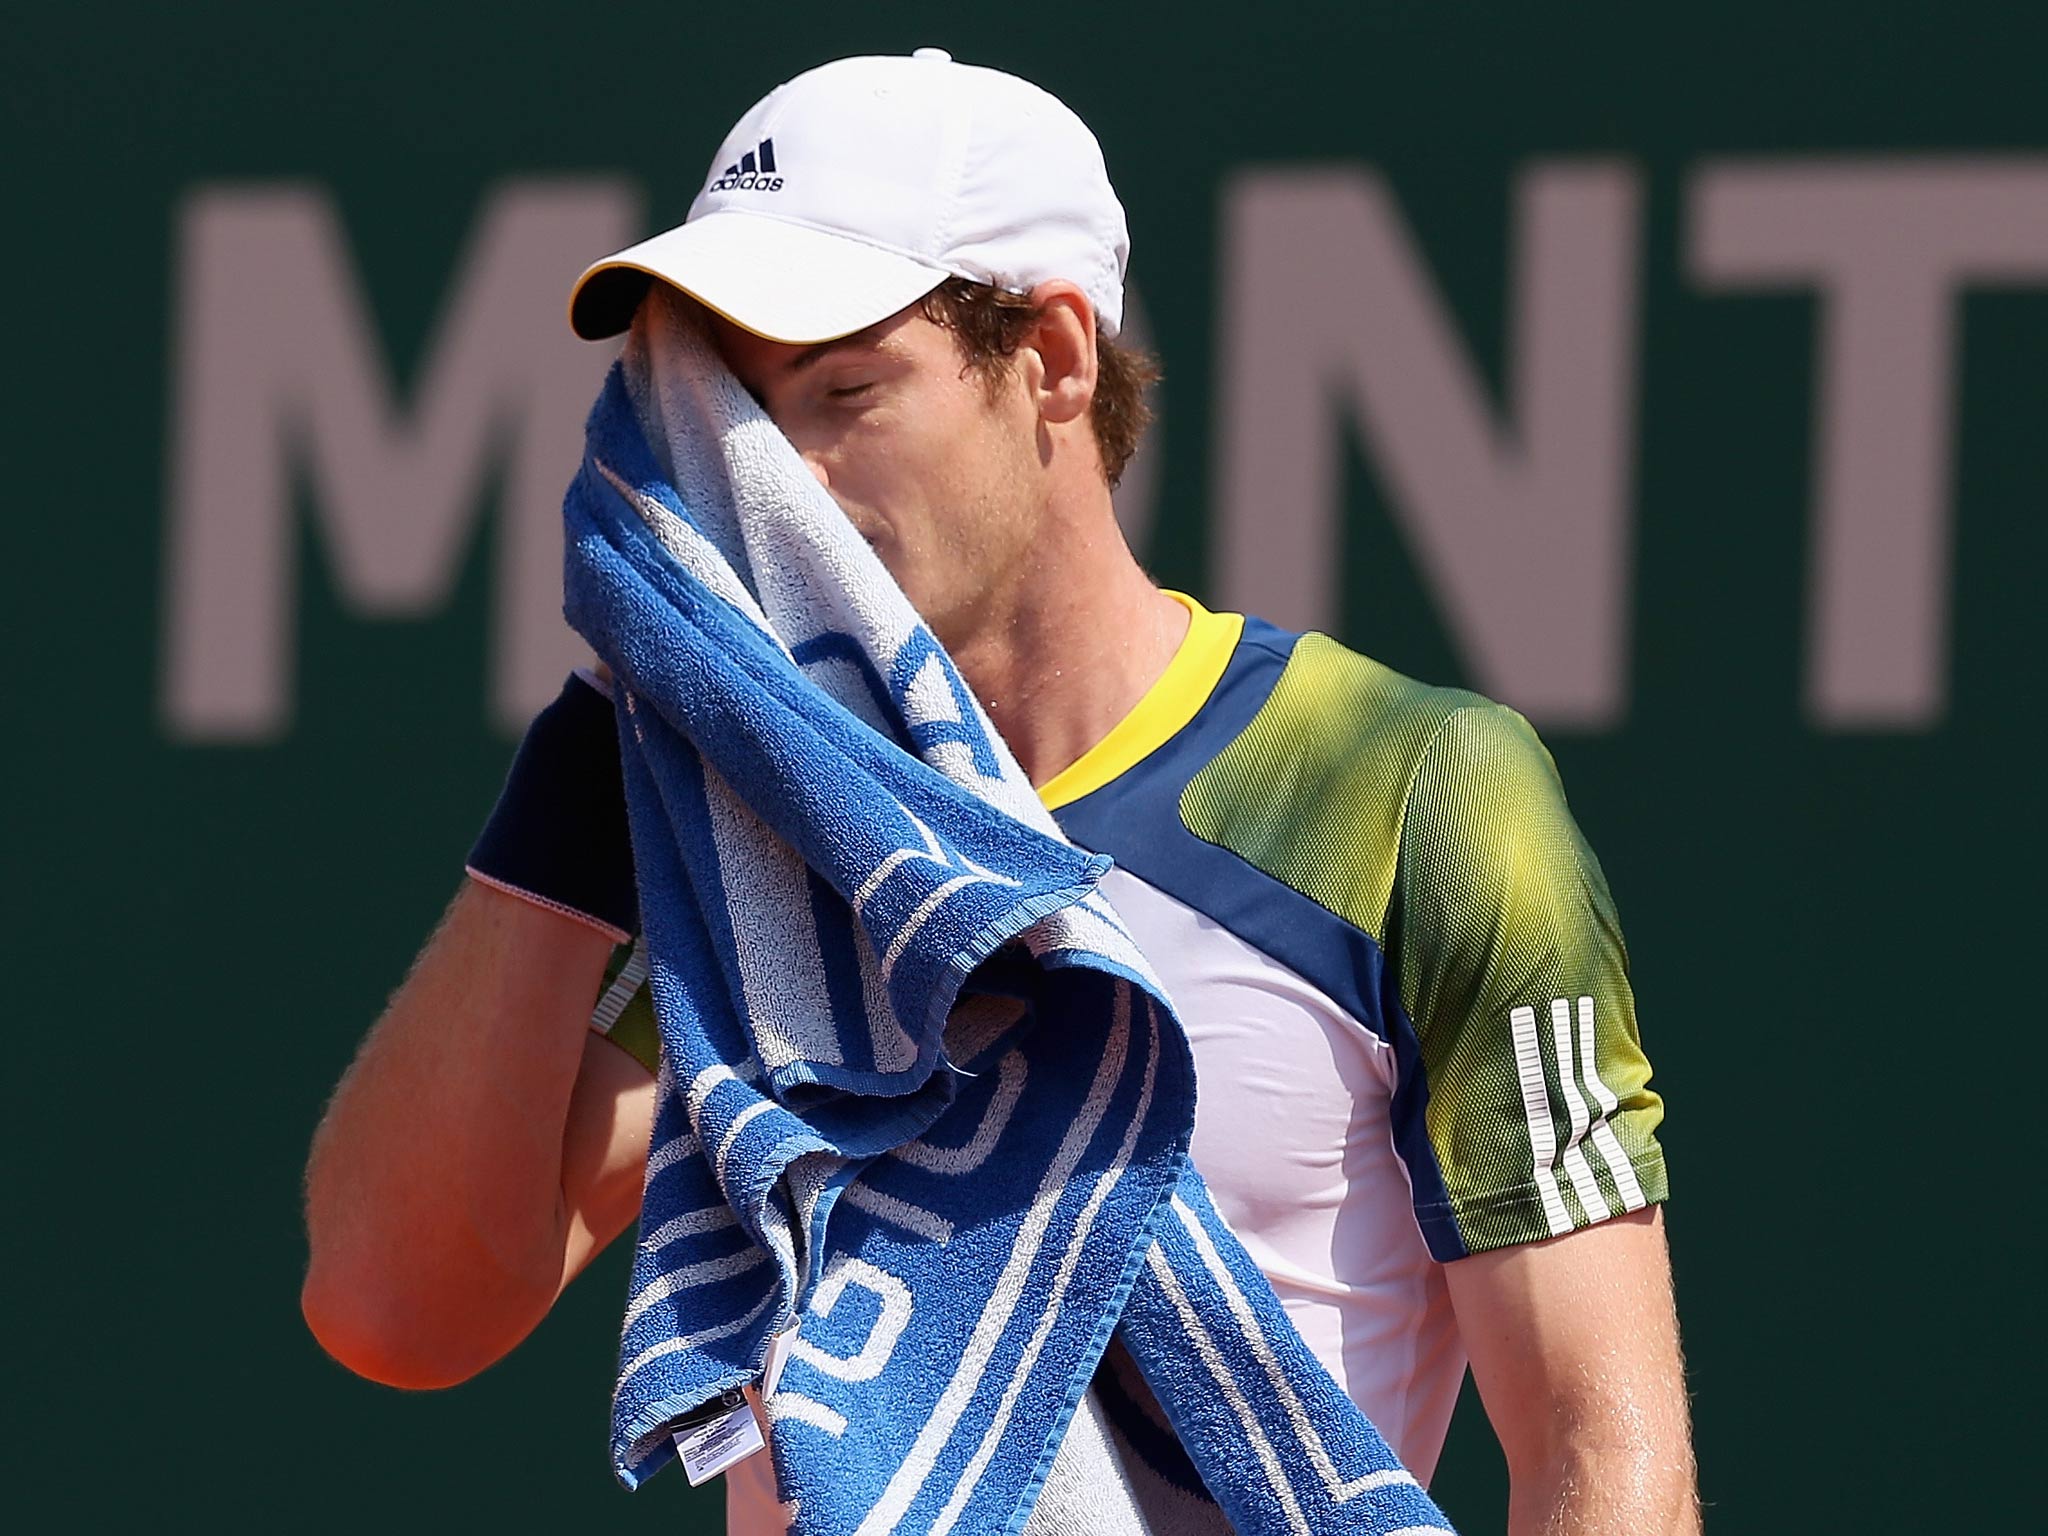 Andy Murray pictured during defeat to Stanislas Wawrinka in the third round of the Monte Carlo Masters